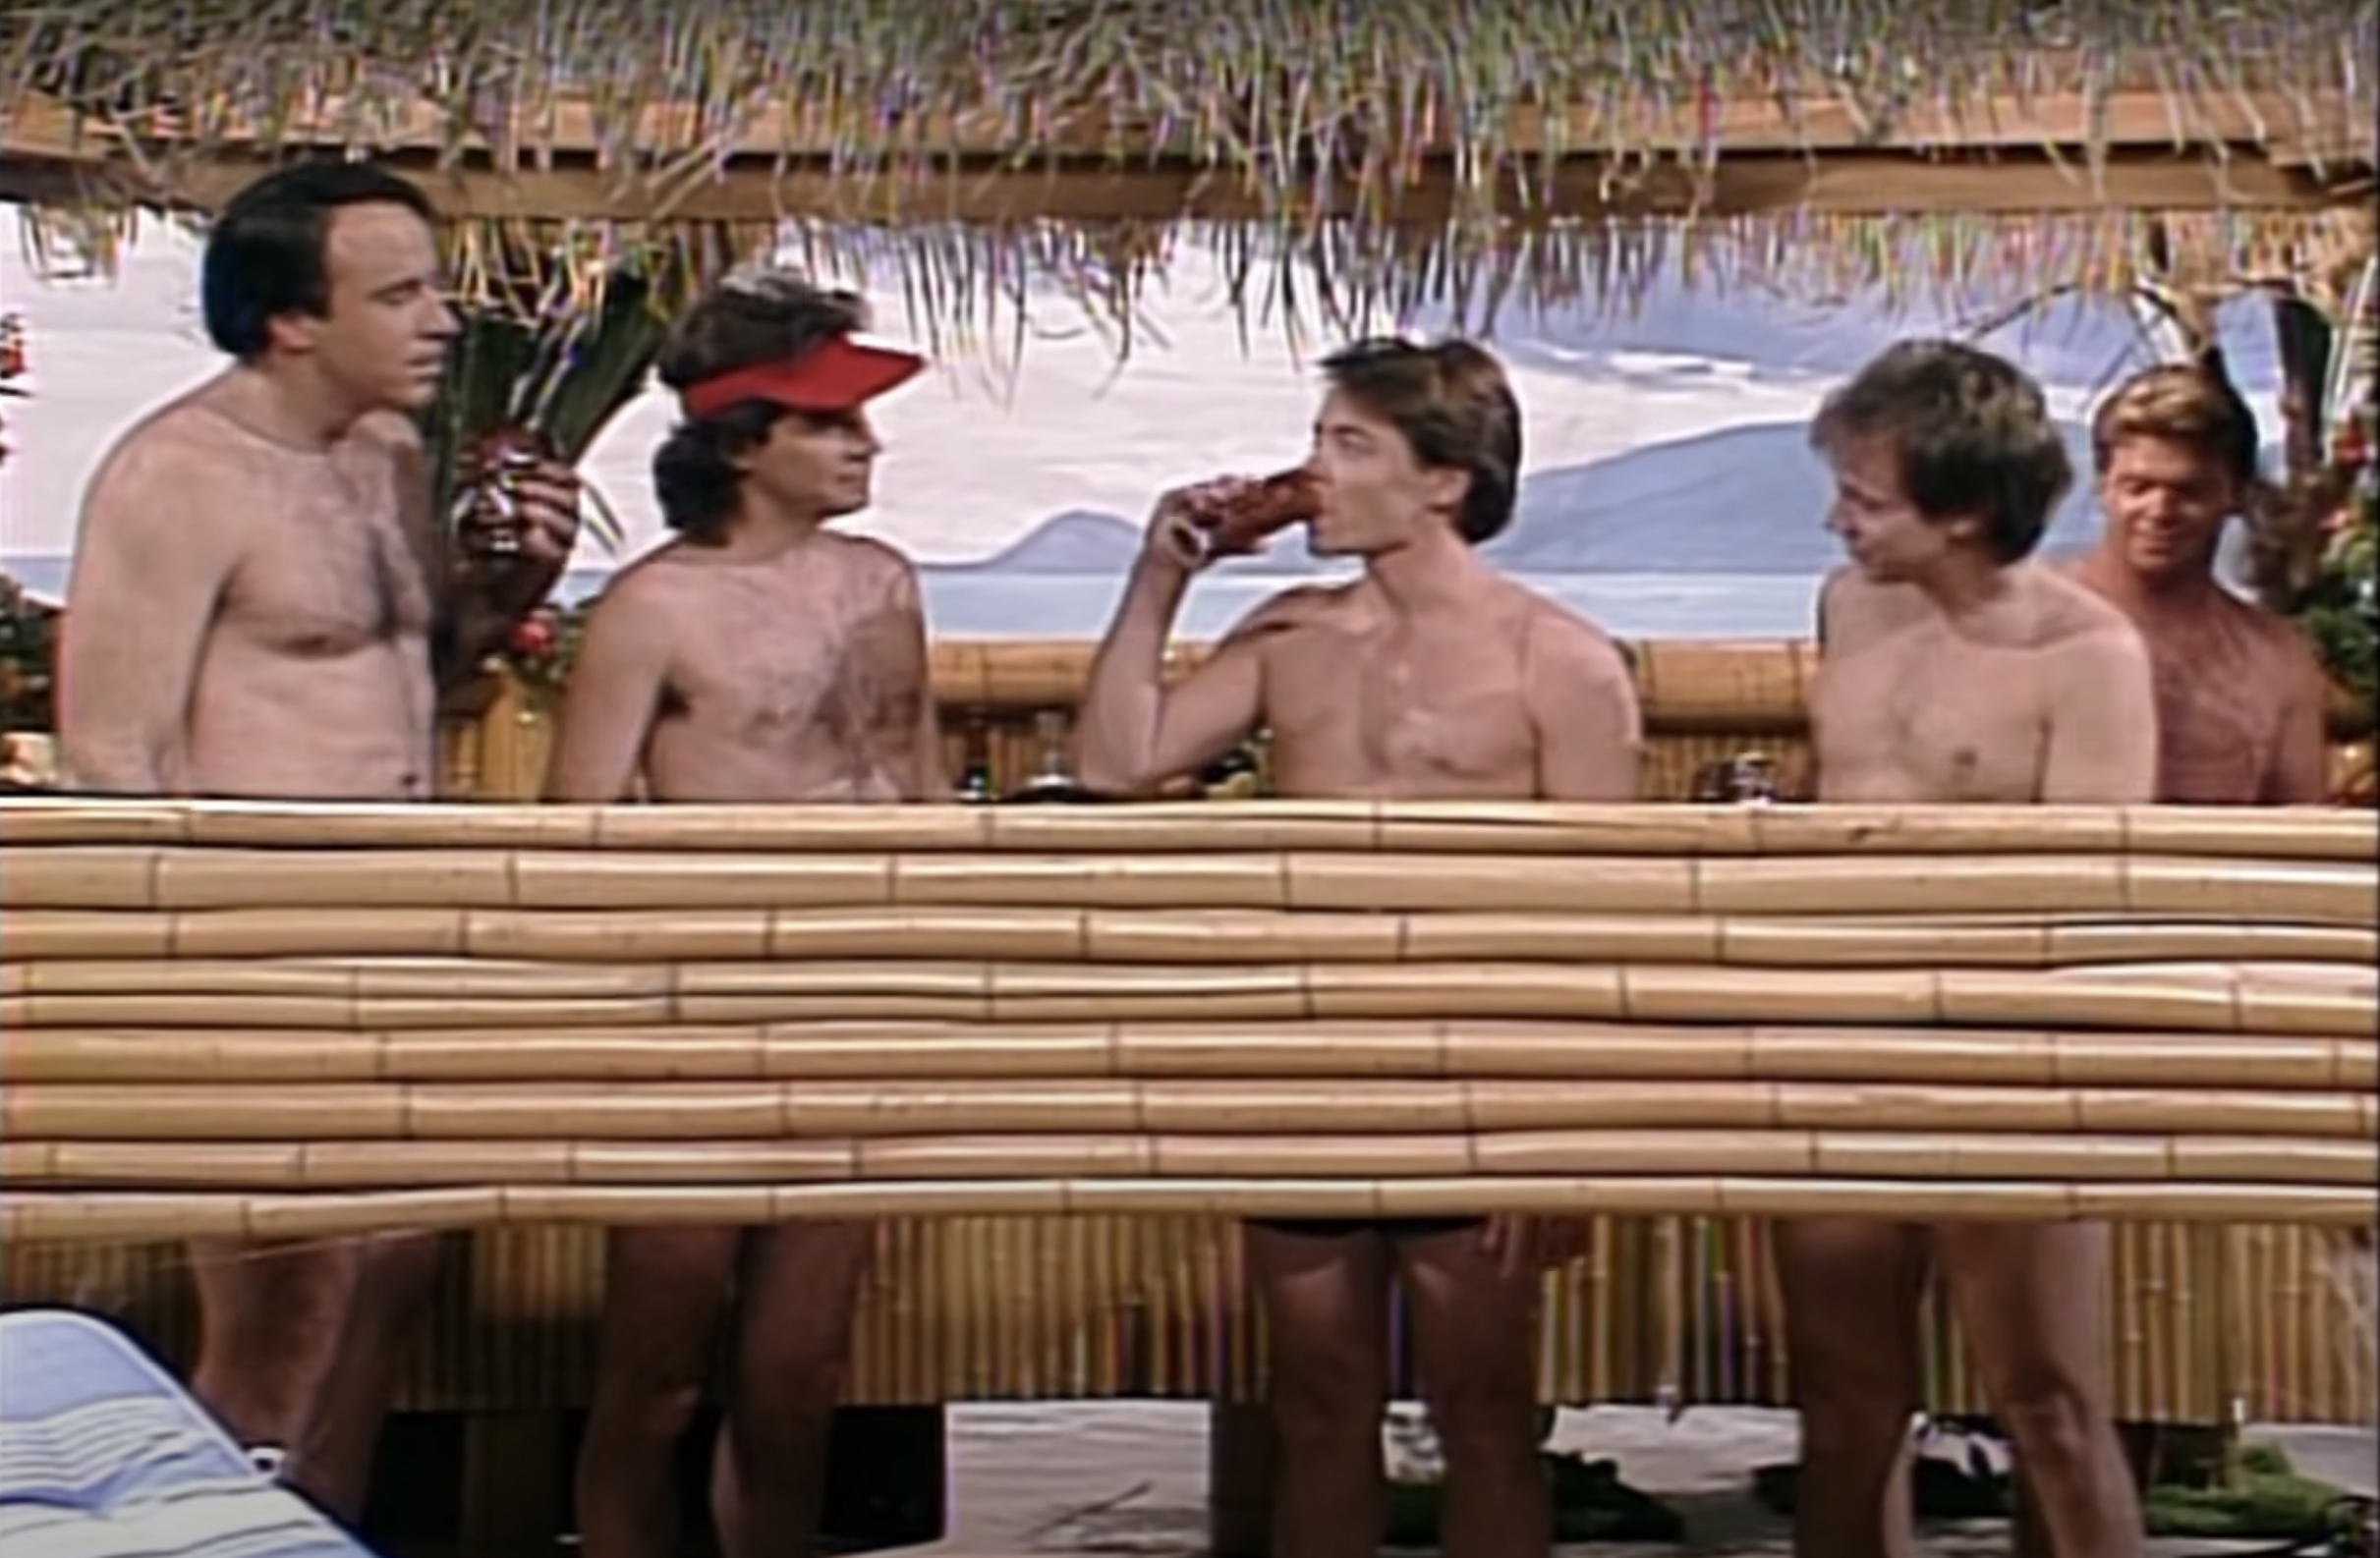 Screenshot from the &quot;Nude Beach&quot; sketch on &quot;SNL&quot;